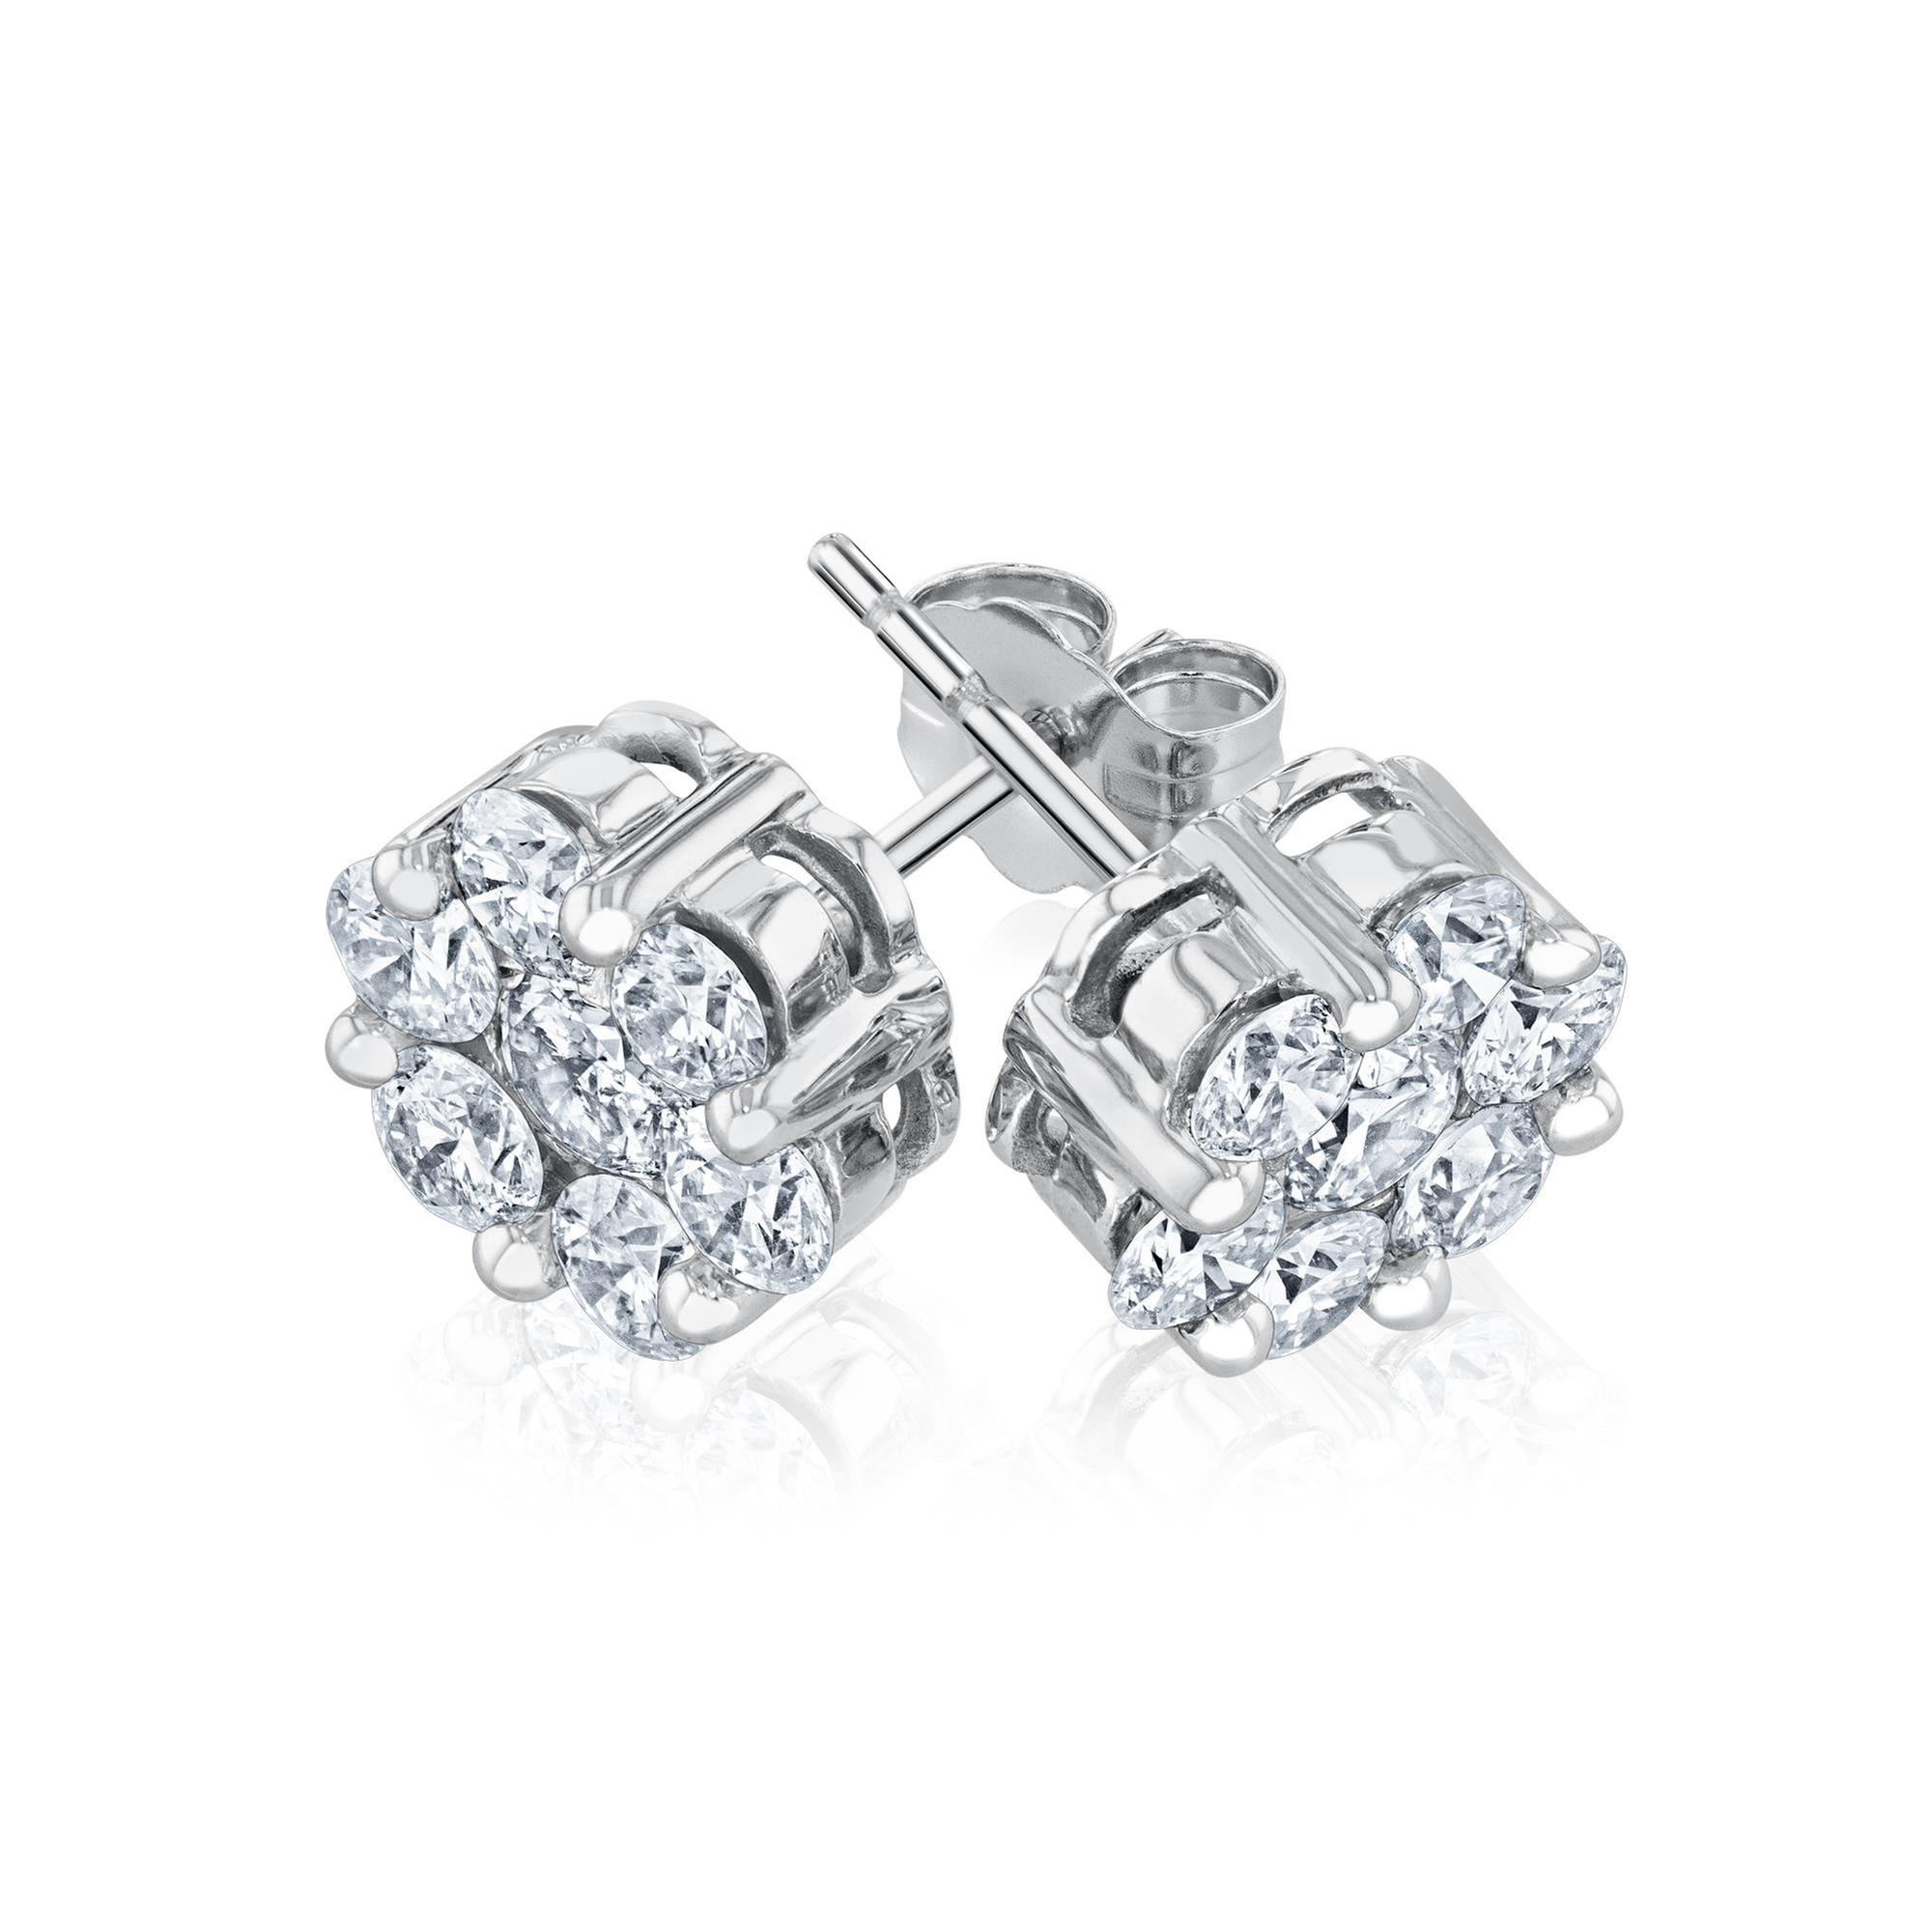 1 1/2ctw Round Diamond Composite Flower White Gold Stud Earrings -  REEDS, ER1056A68W